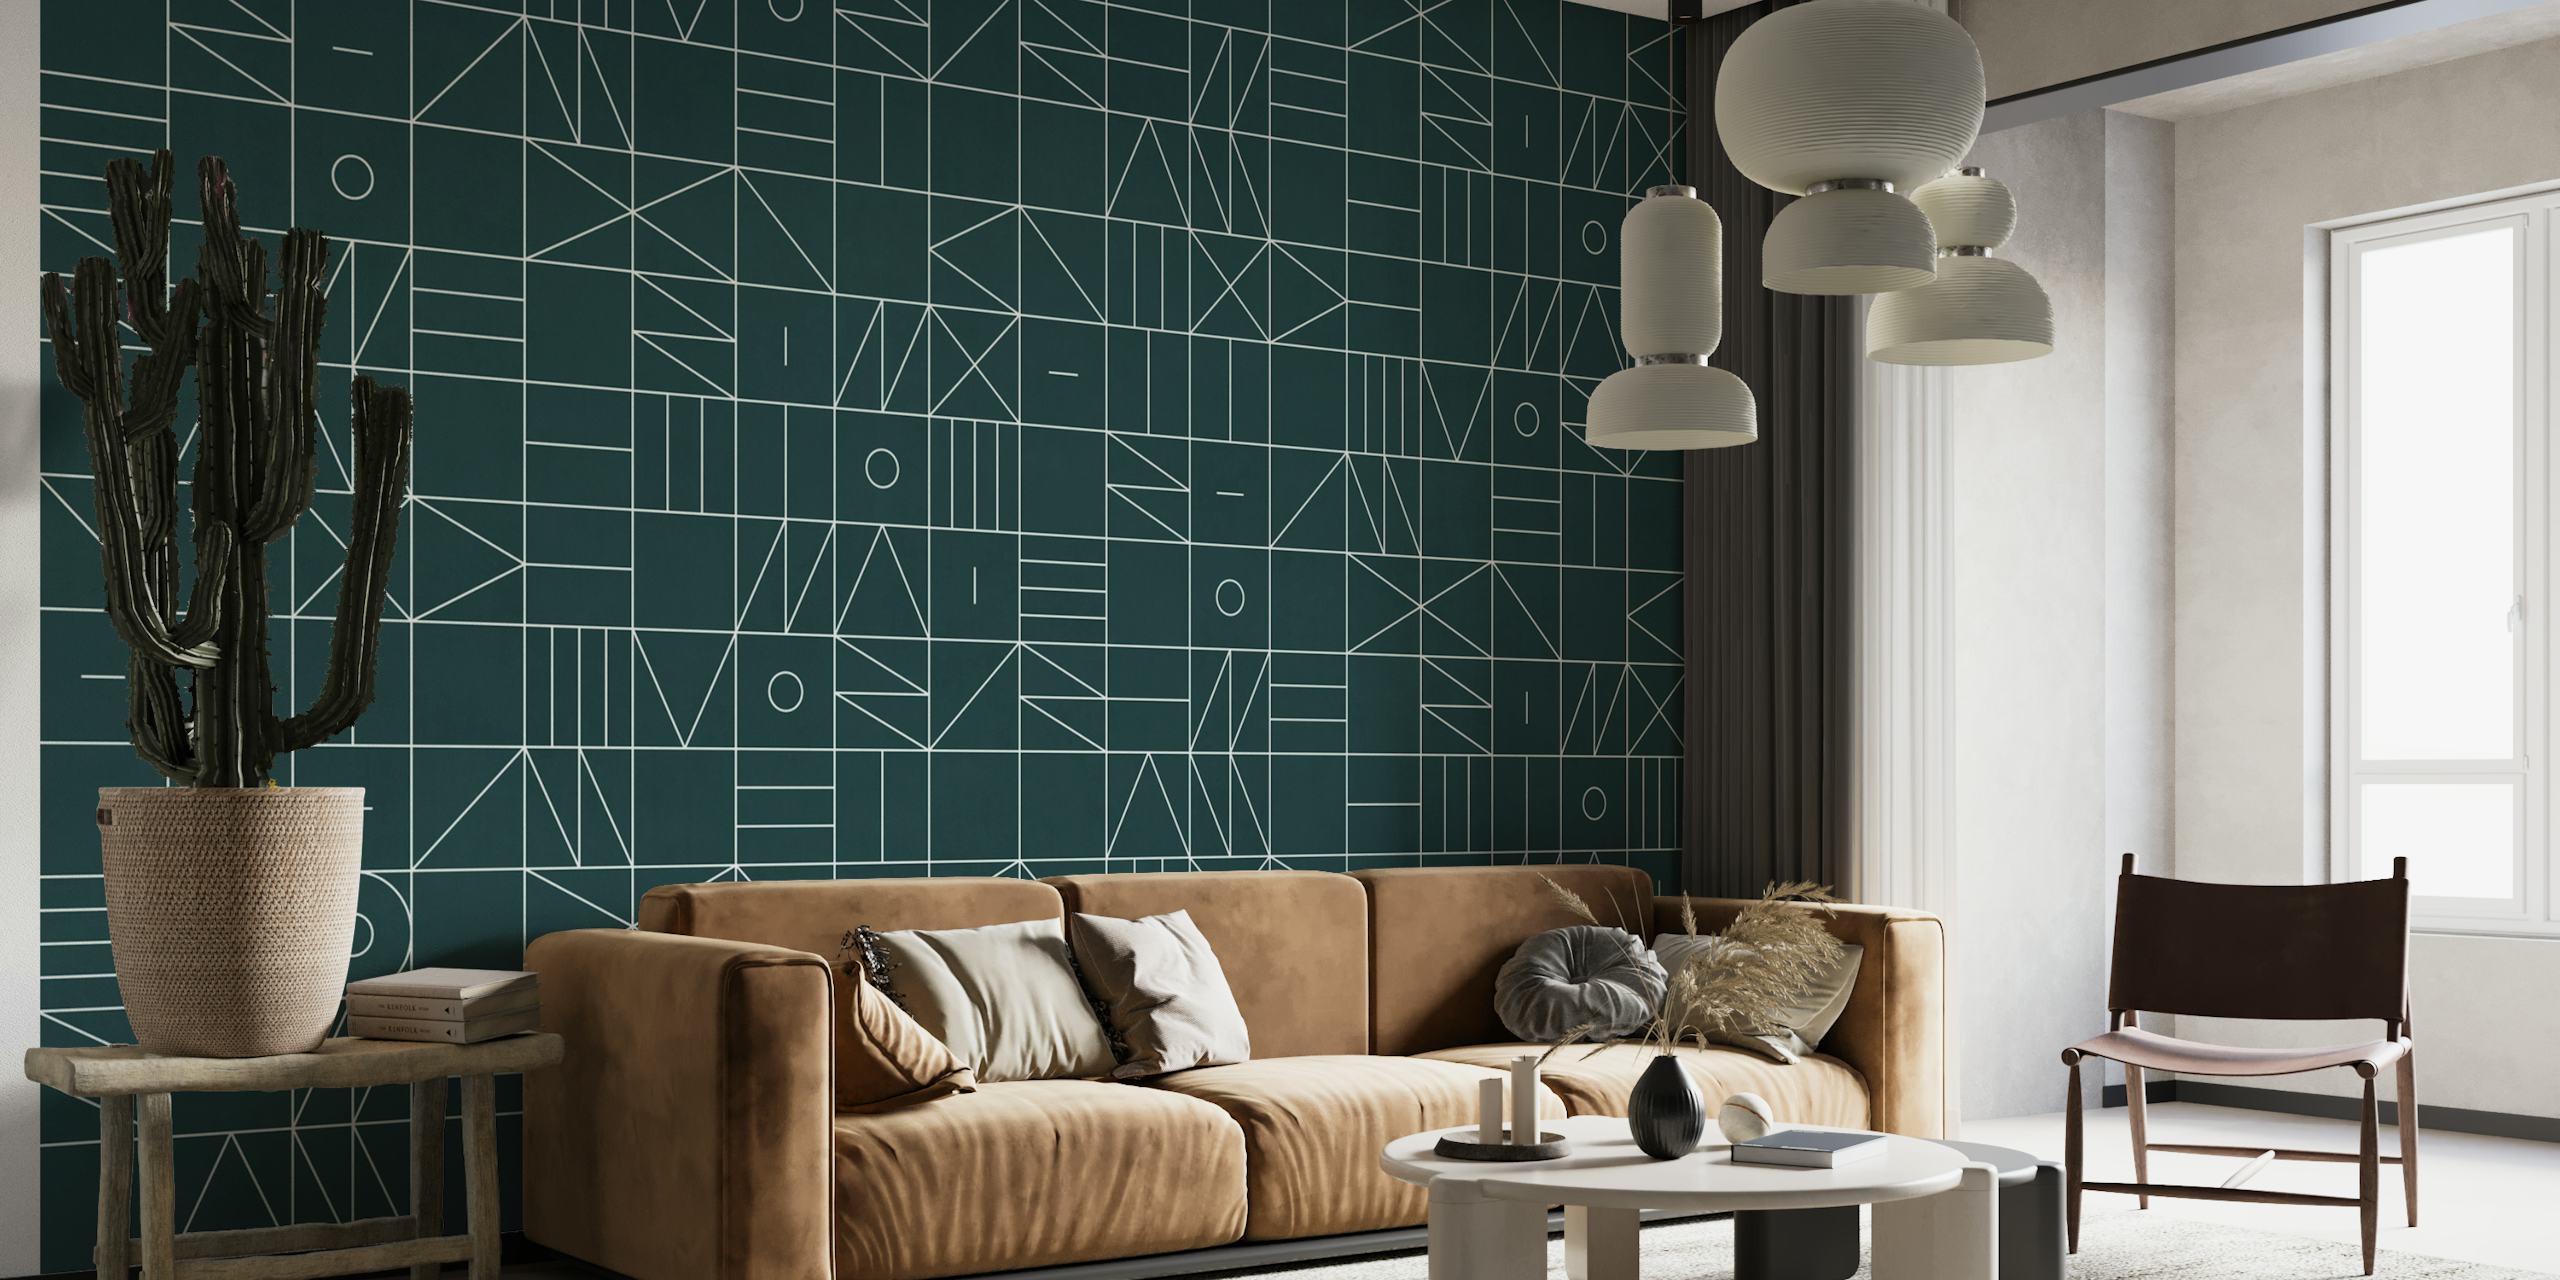 Geometric pattern wall mural with teal and white design